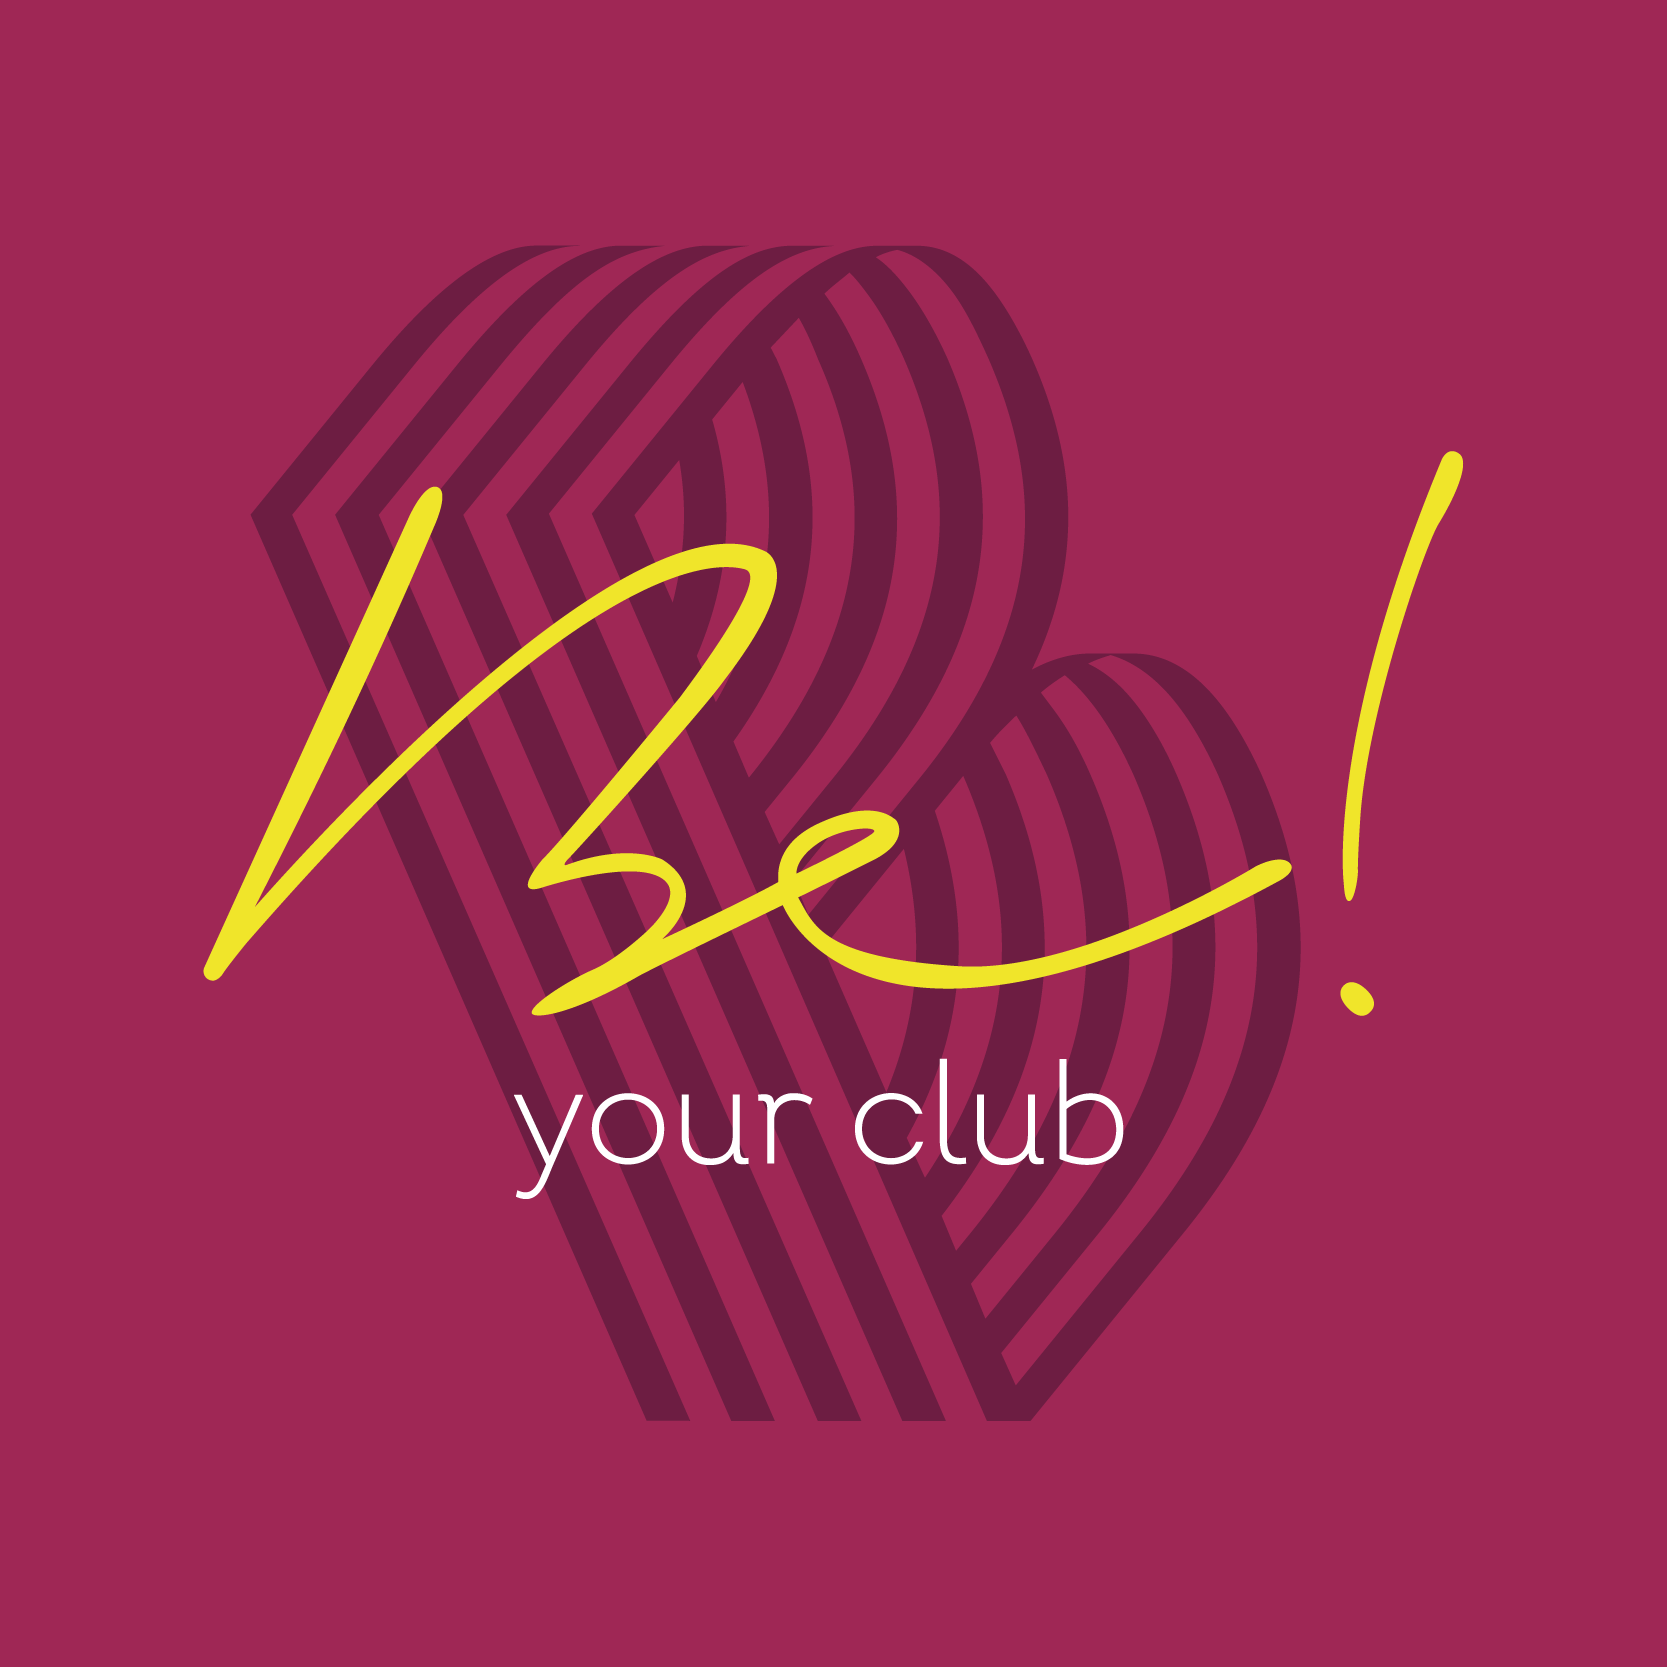 Be your club